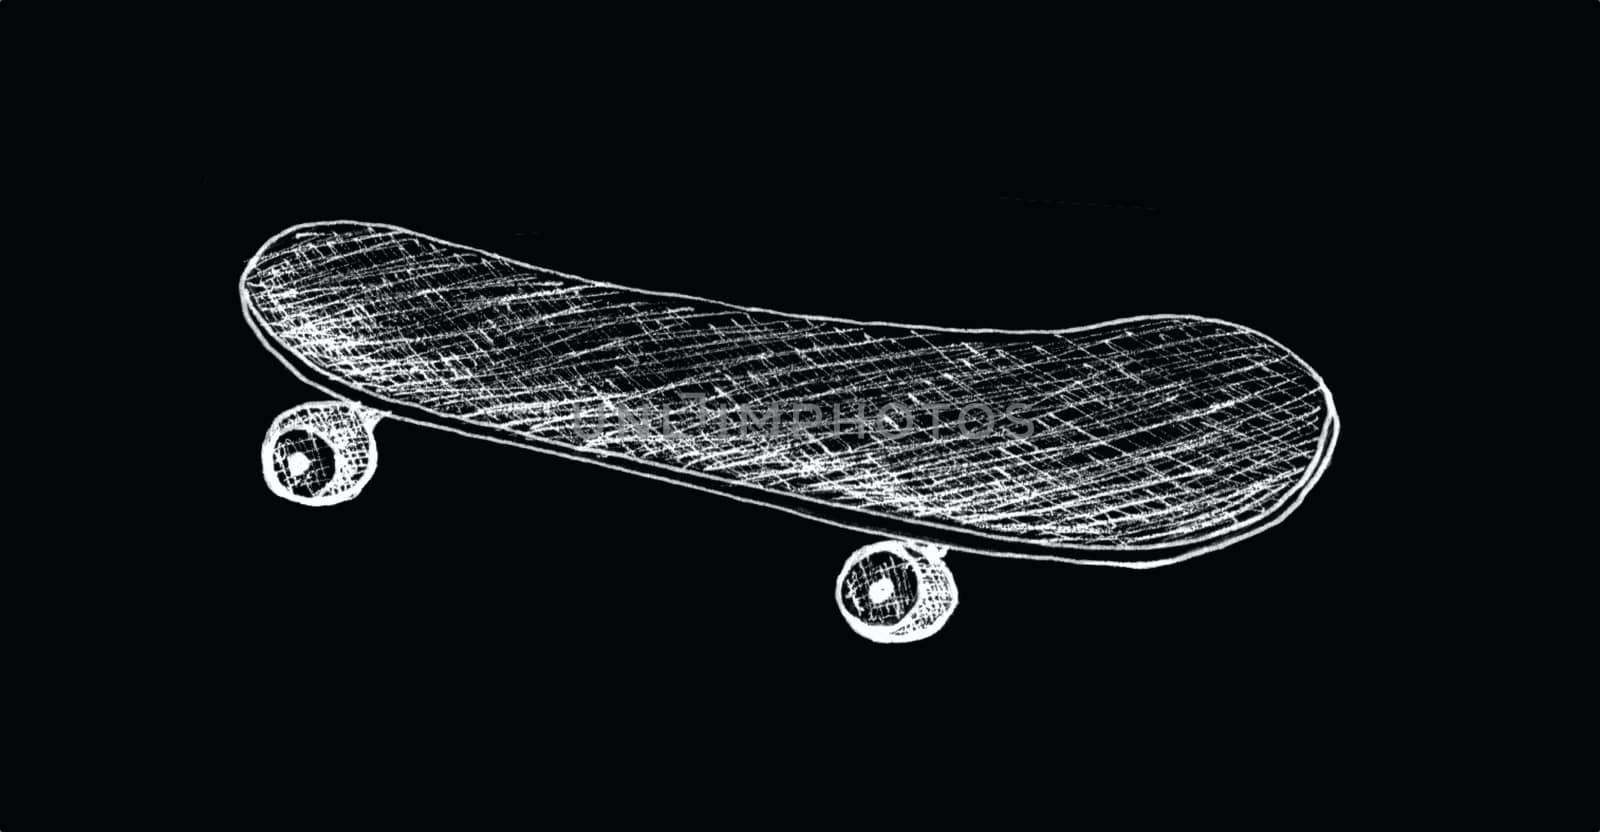 Skateboard ,longboard, pennyboard isolated on black background. Engraved style illustration for poster, decoration or print. Hand drawn sketch. Detailed vintage etching drawing by sshisshka